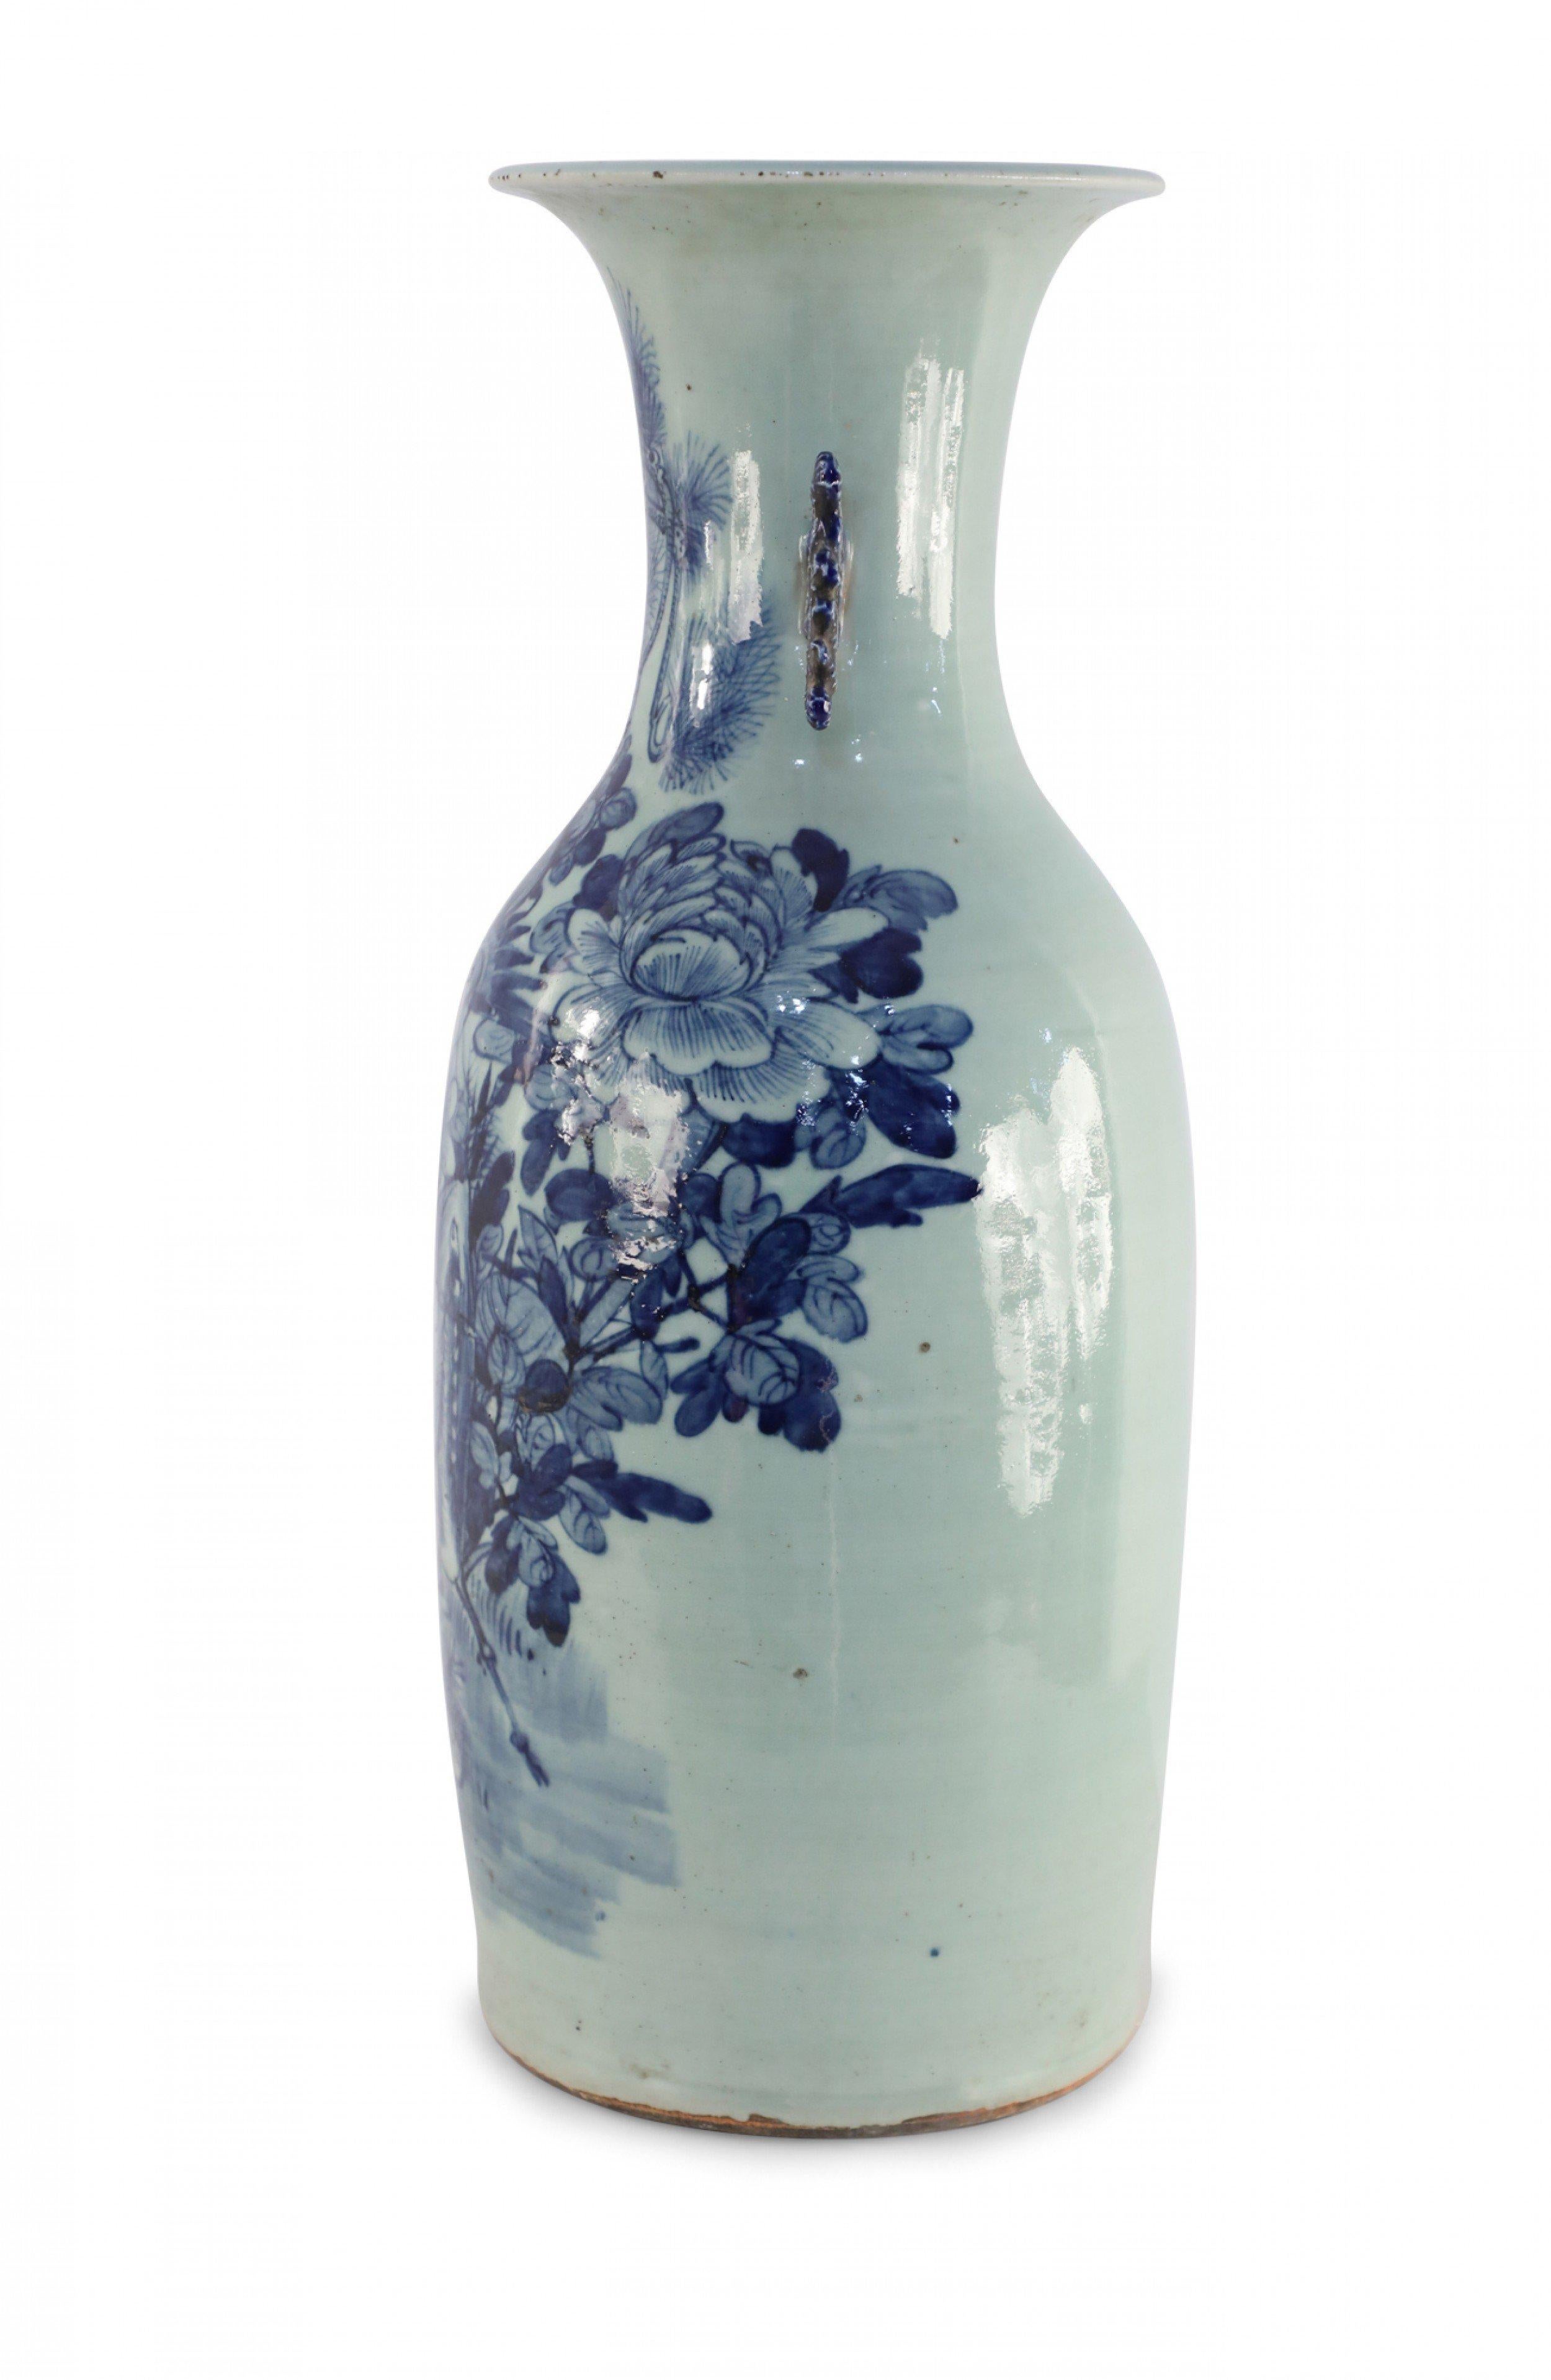 Antique Chinese (late 19th century) large white, porcelain urn with a scene of blue flora and fauna, and two dark blue scrolled handles along the neck.
   